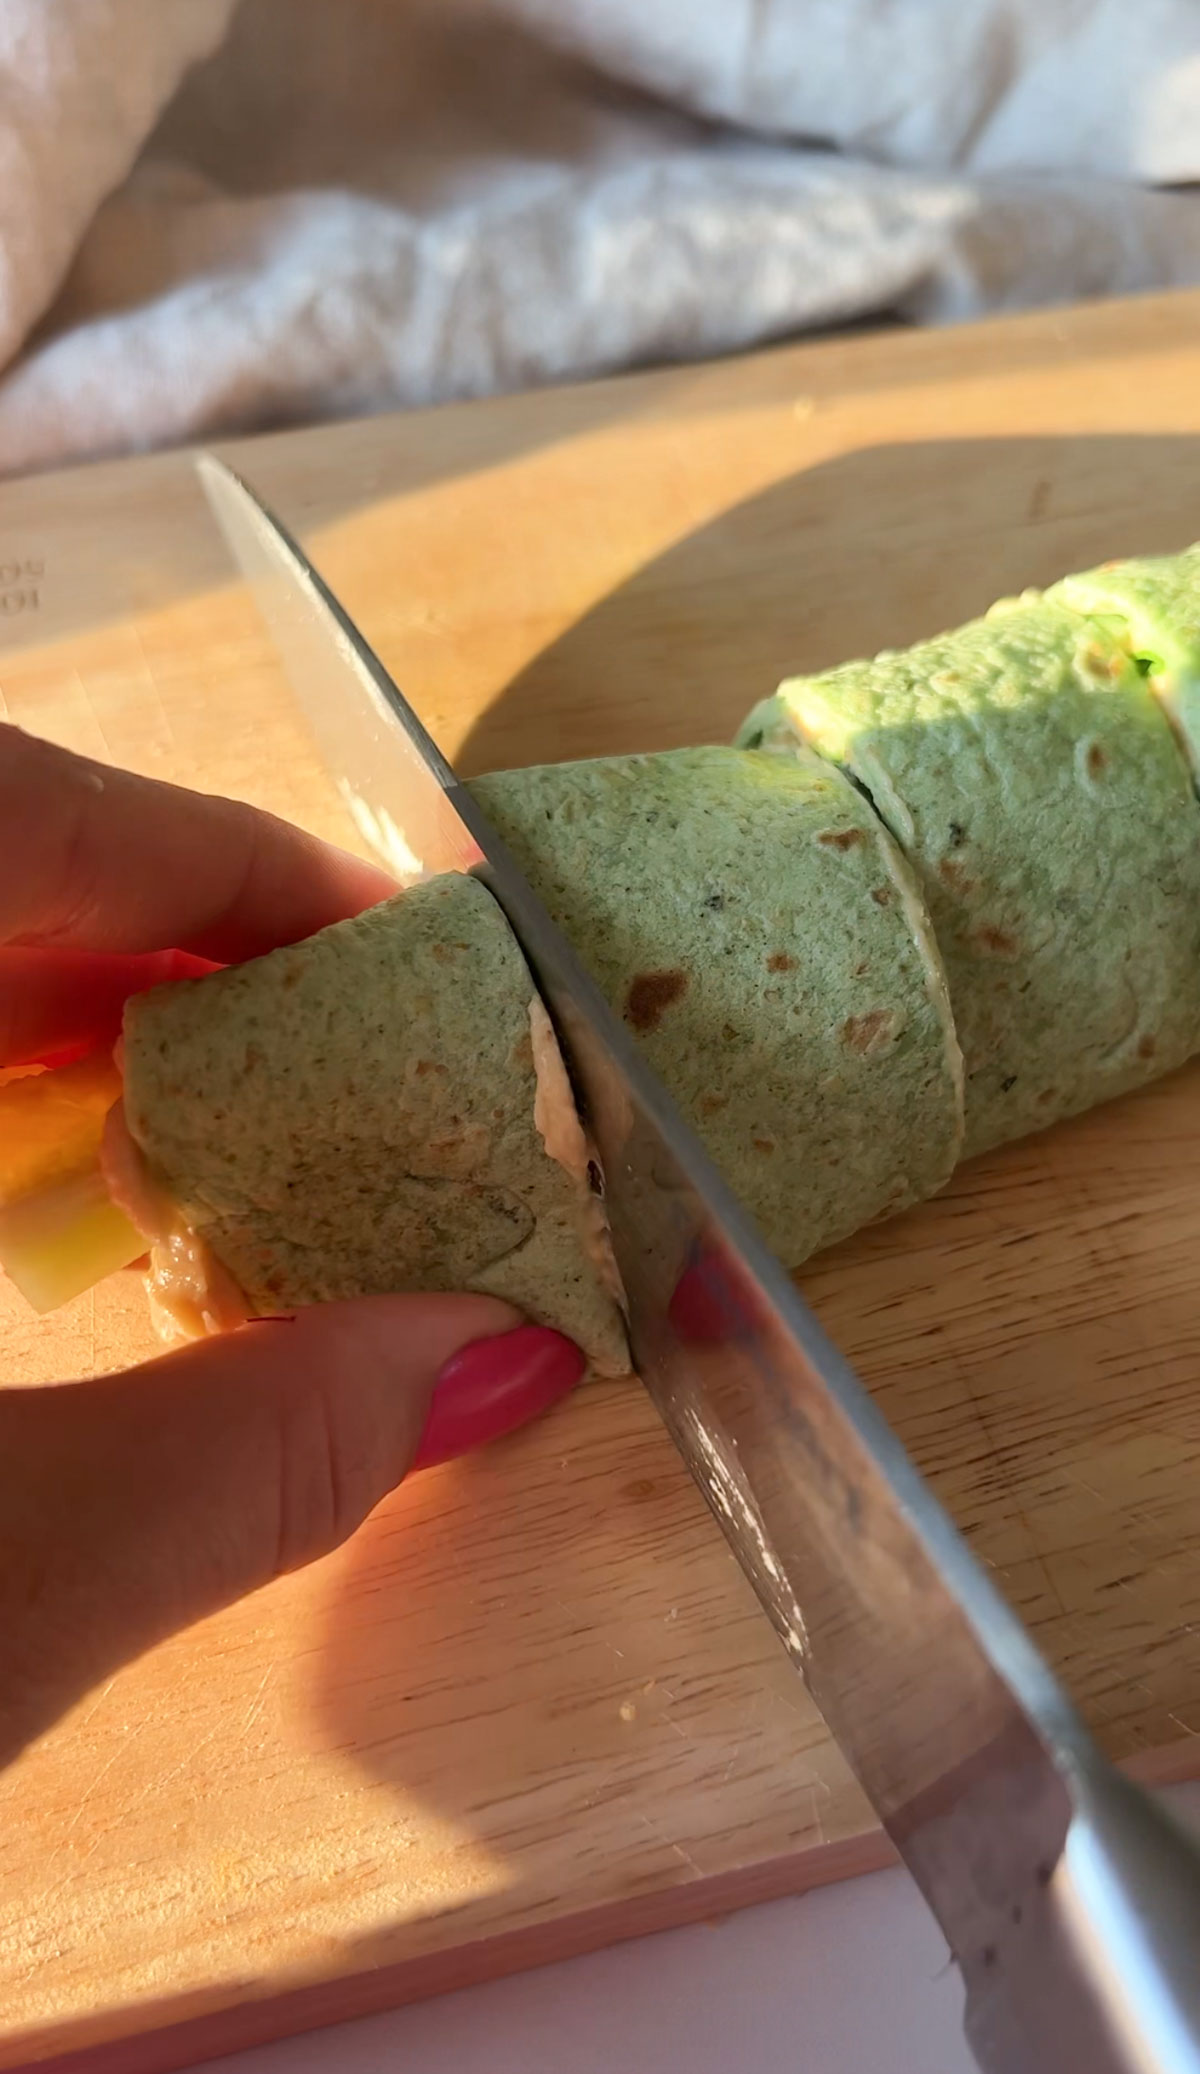 Slicing the tortilla pinwheels into bite sized pieces.